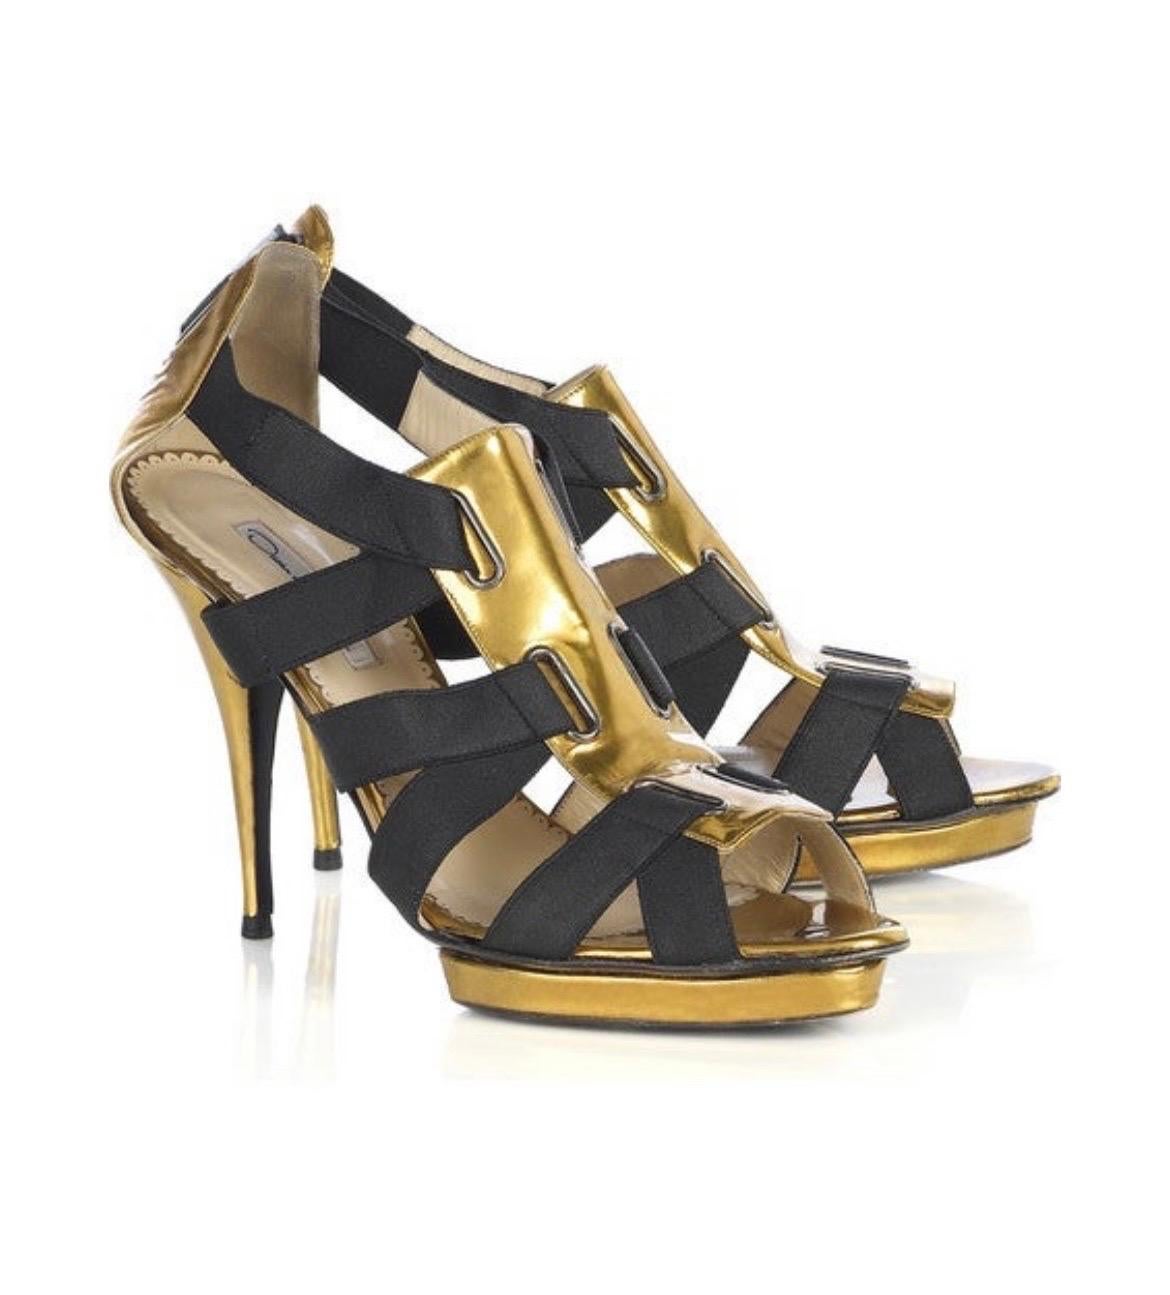 OSCAR DE LA RENTA
Oscar de la Renta black and gold patent leather corset sandals. 
Wear these fabulous look-at-me heels to add the Midas touch to an elegant evening ensemble. 
Heel measures approximately 110mm / 4.5 inches with a 20mm / 1 inch